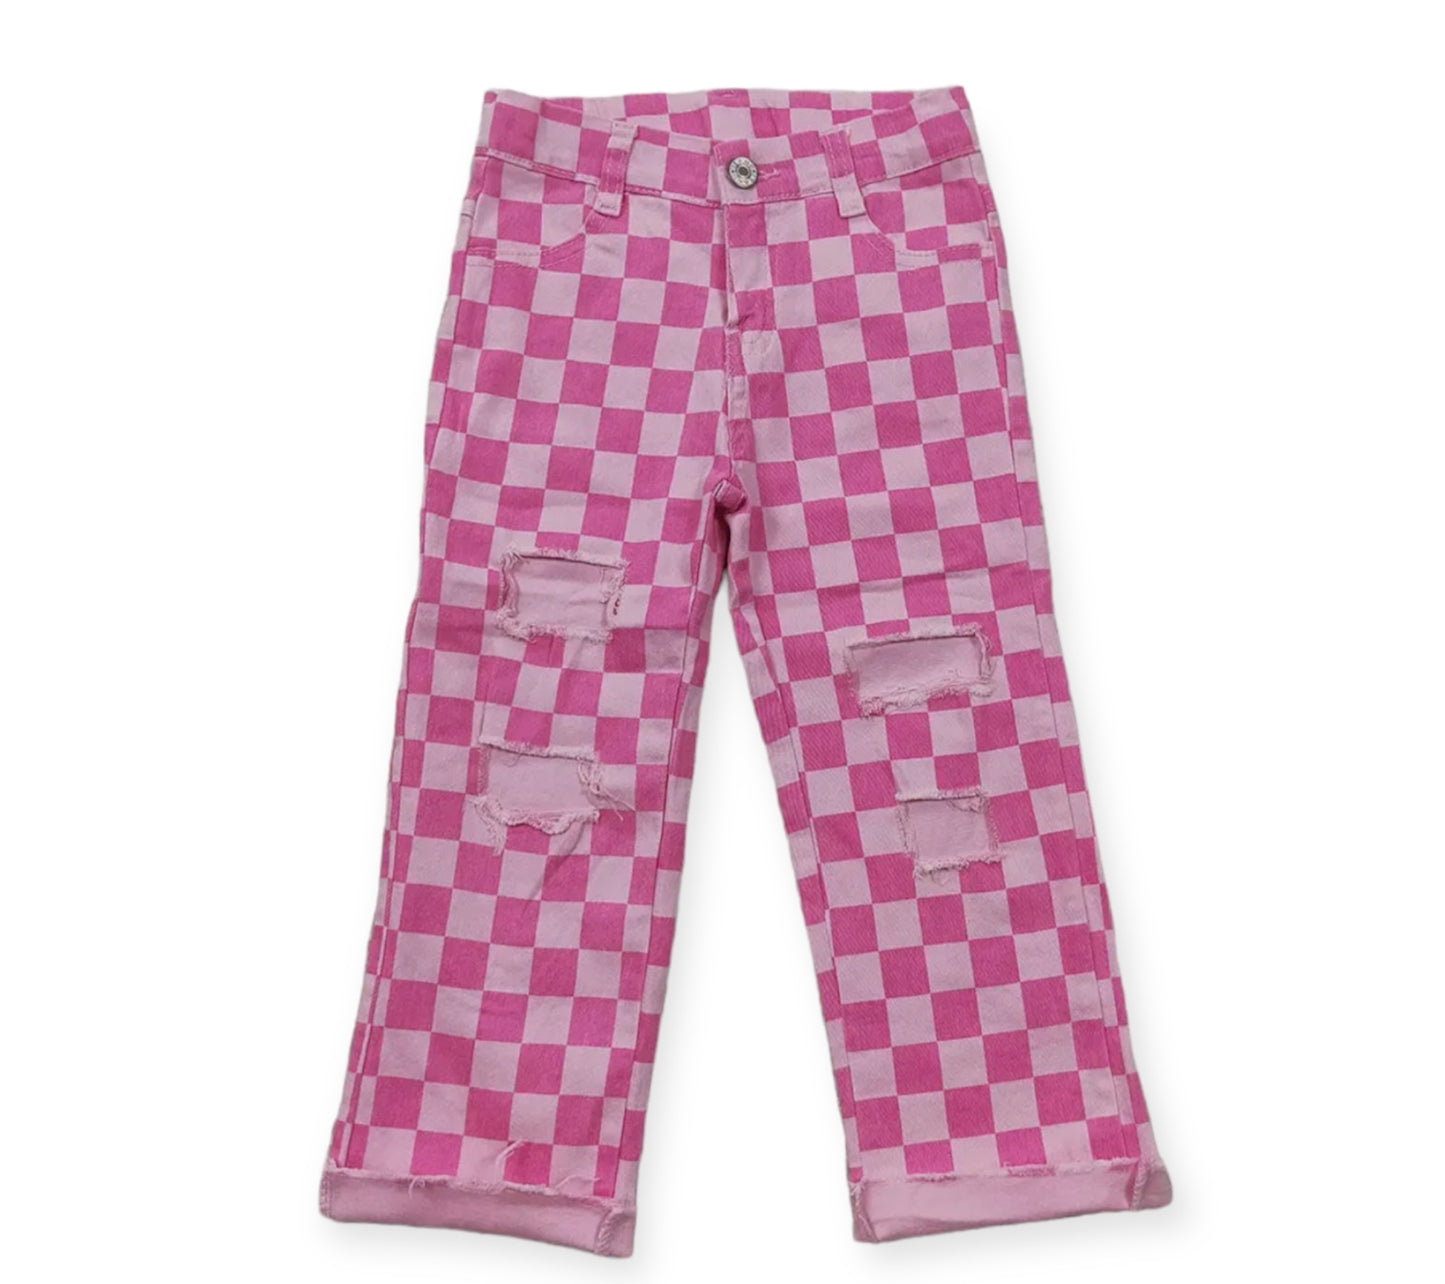 Pink Checkered Jeans